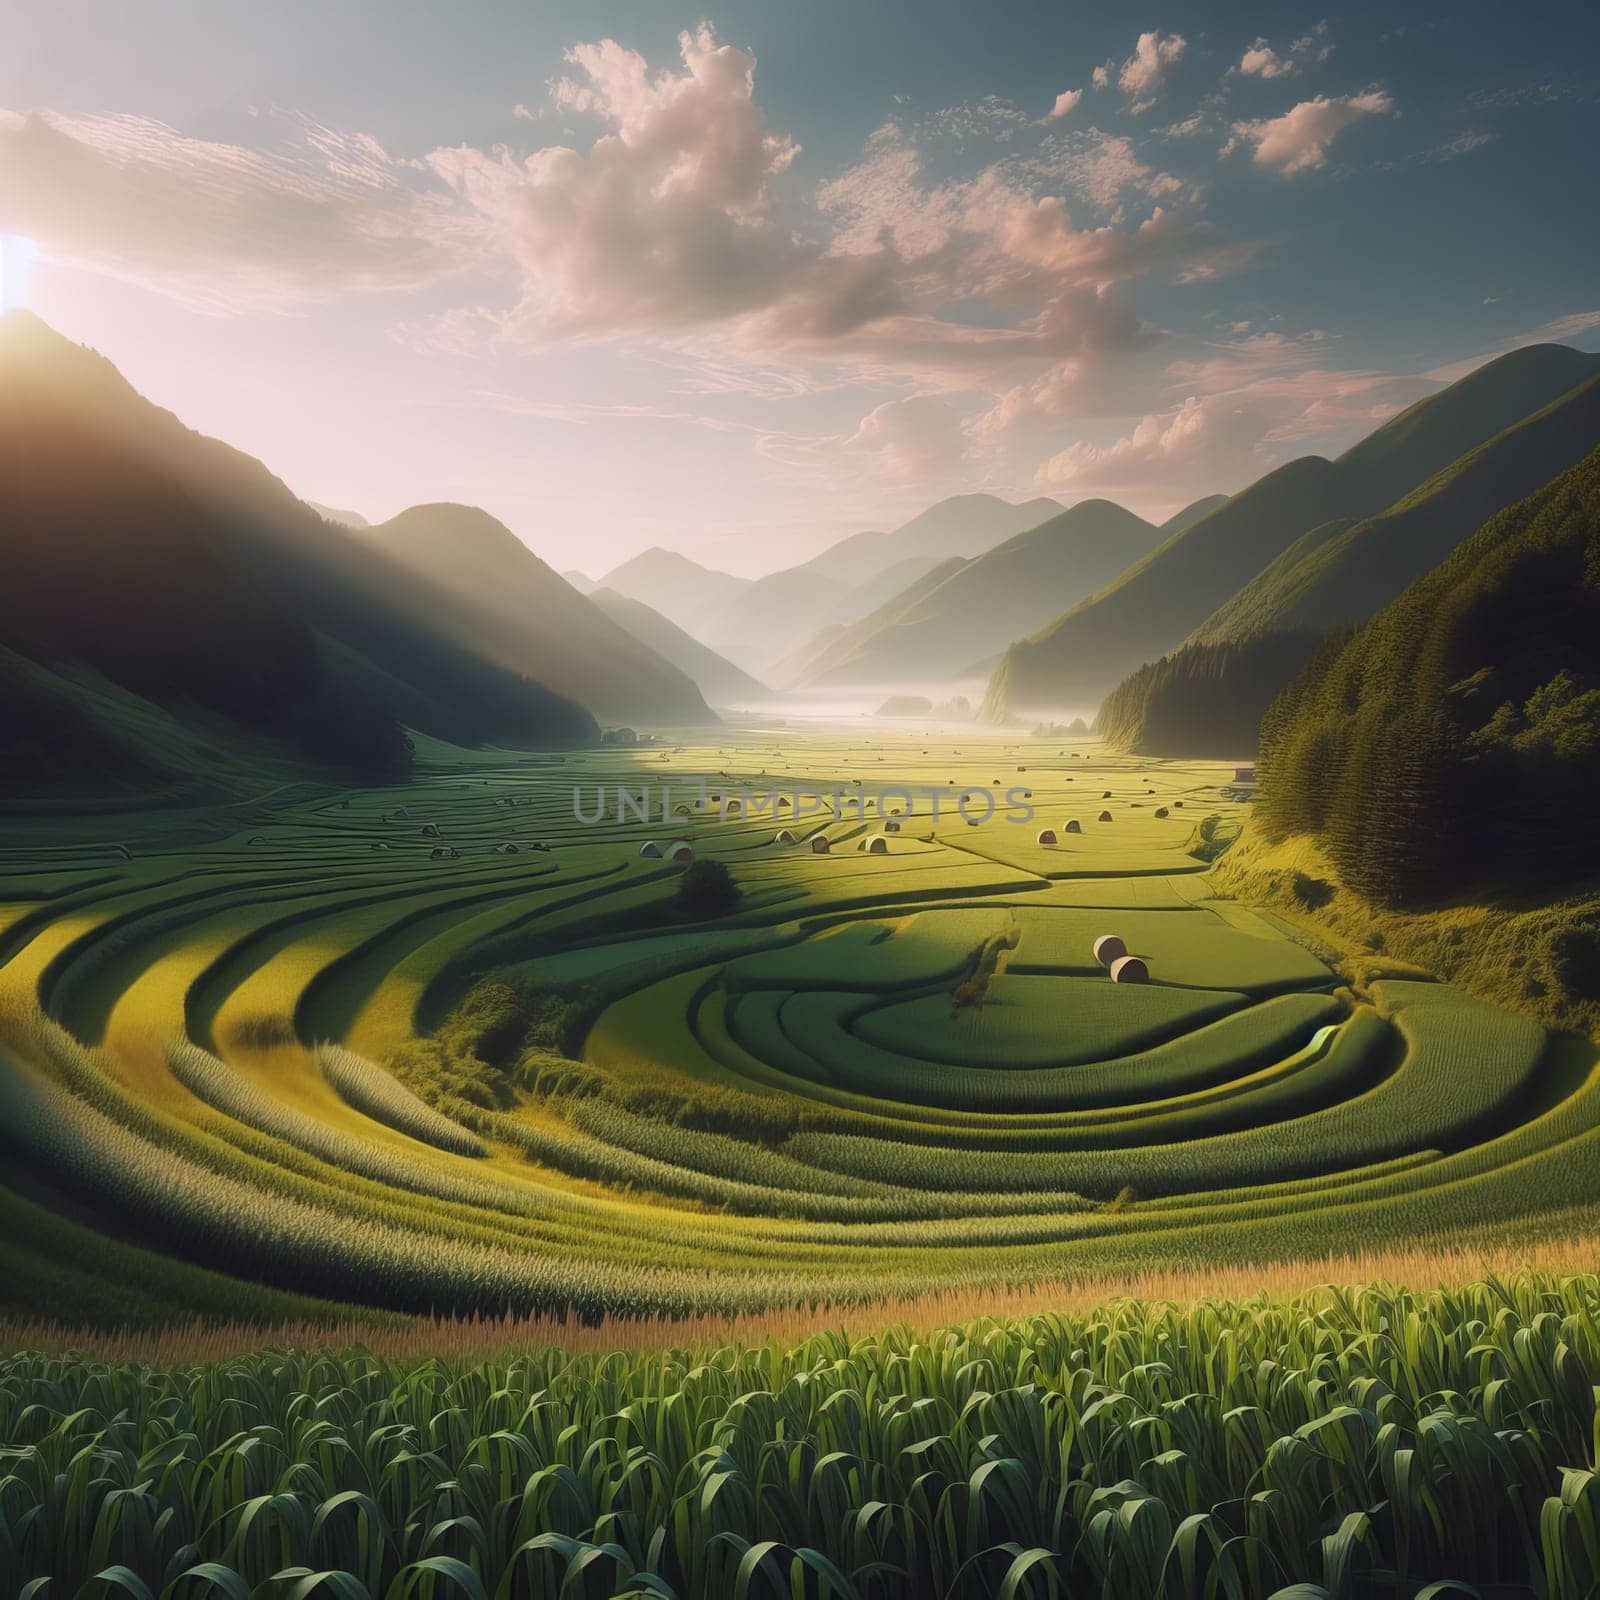 Breathtaking view of terraced fields amidst mountains, under a serene sky at sunrise